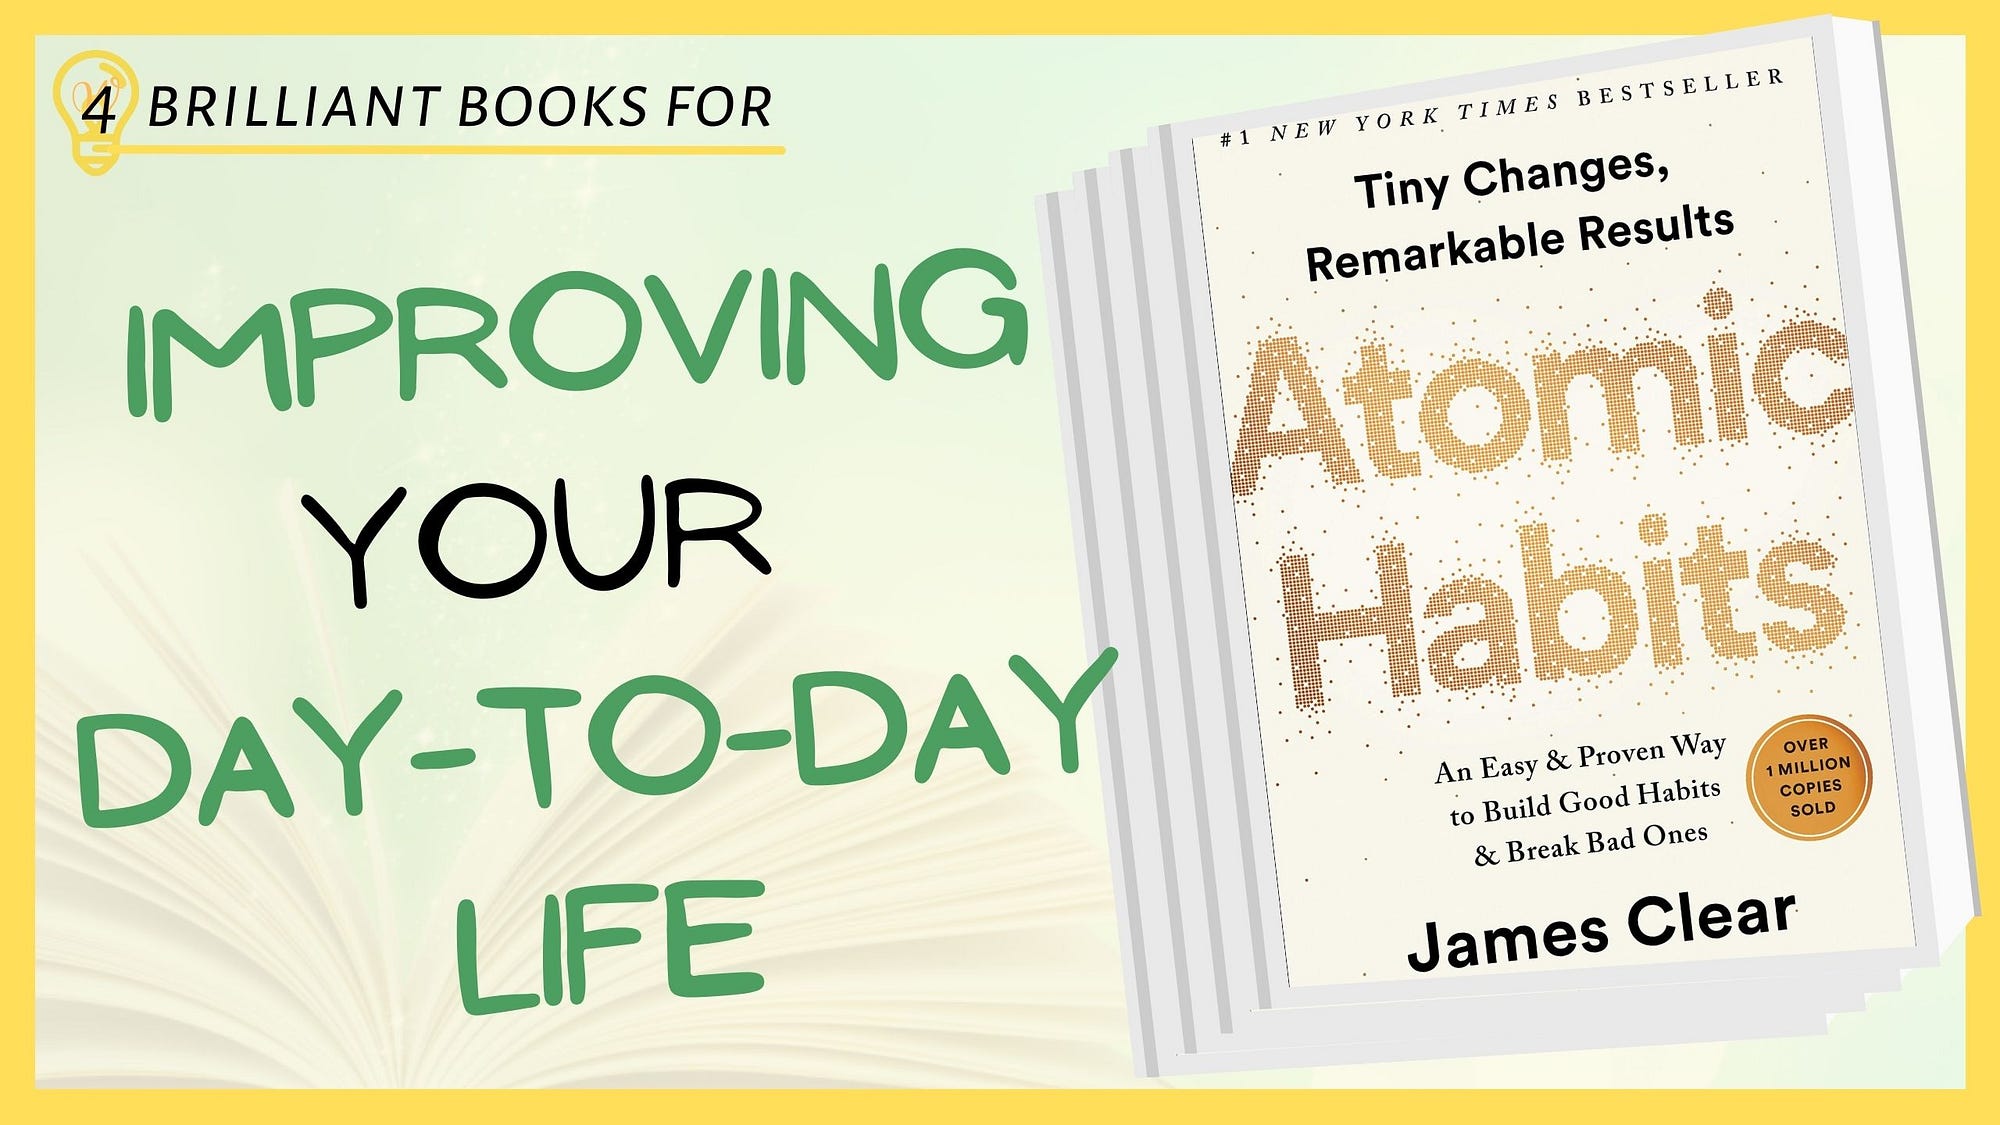 Mini book review: Atomic Habits: An Easy & Proven Way to Build